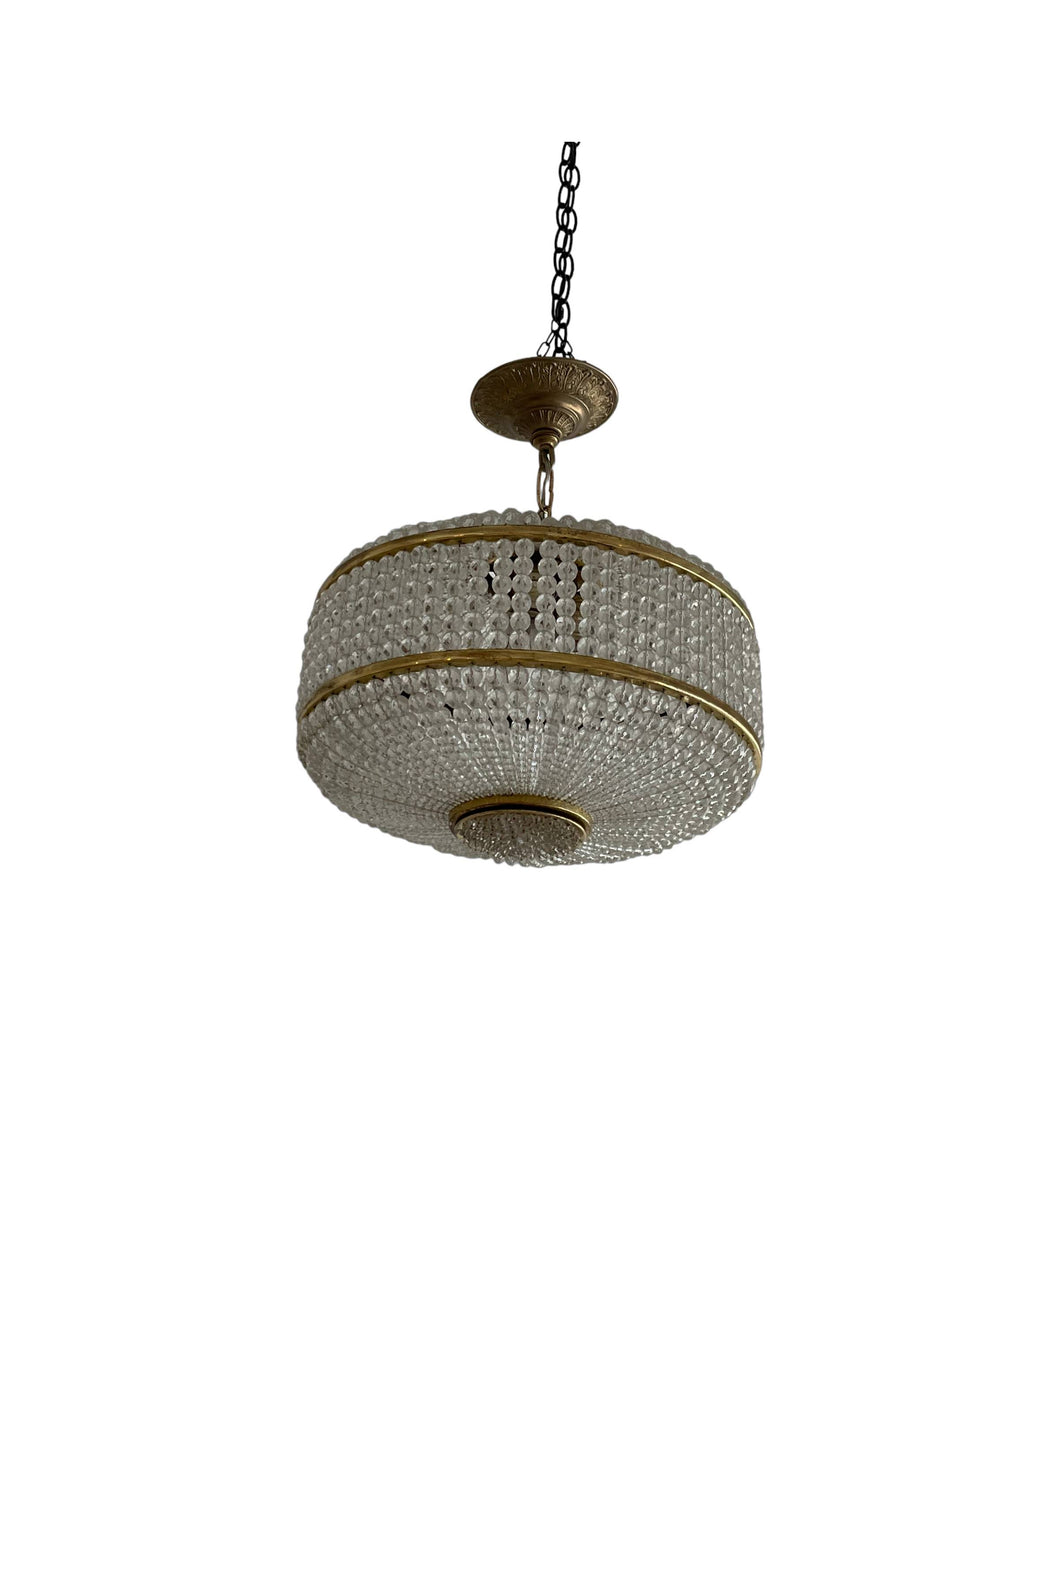 Brass and Crystal Drum Pendant Light Fixture